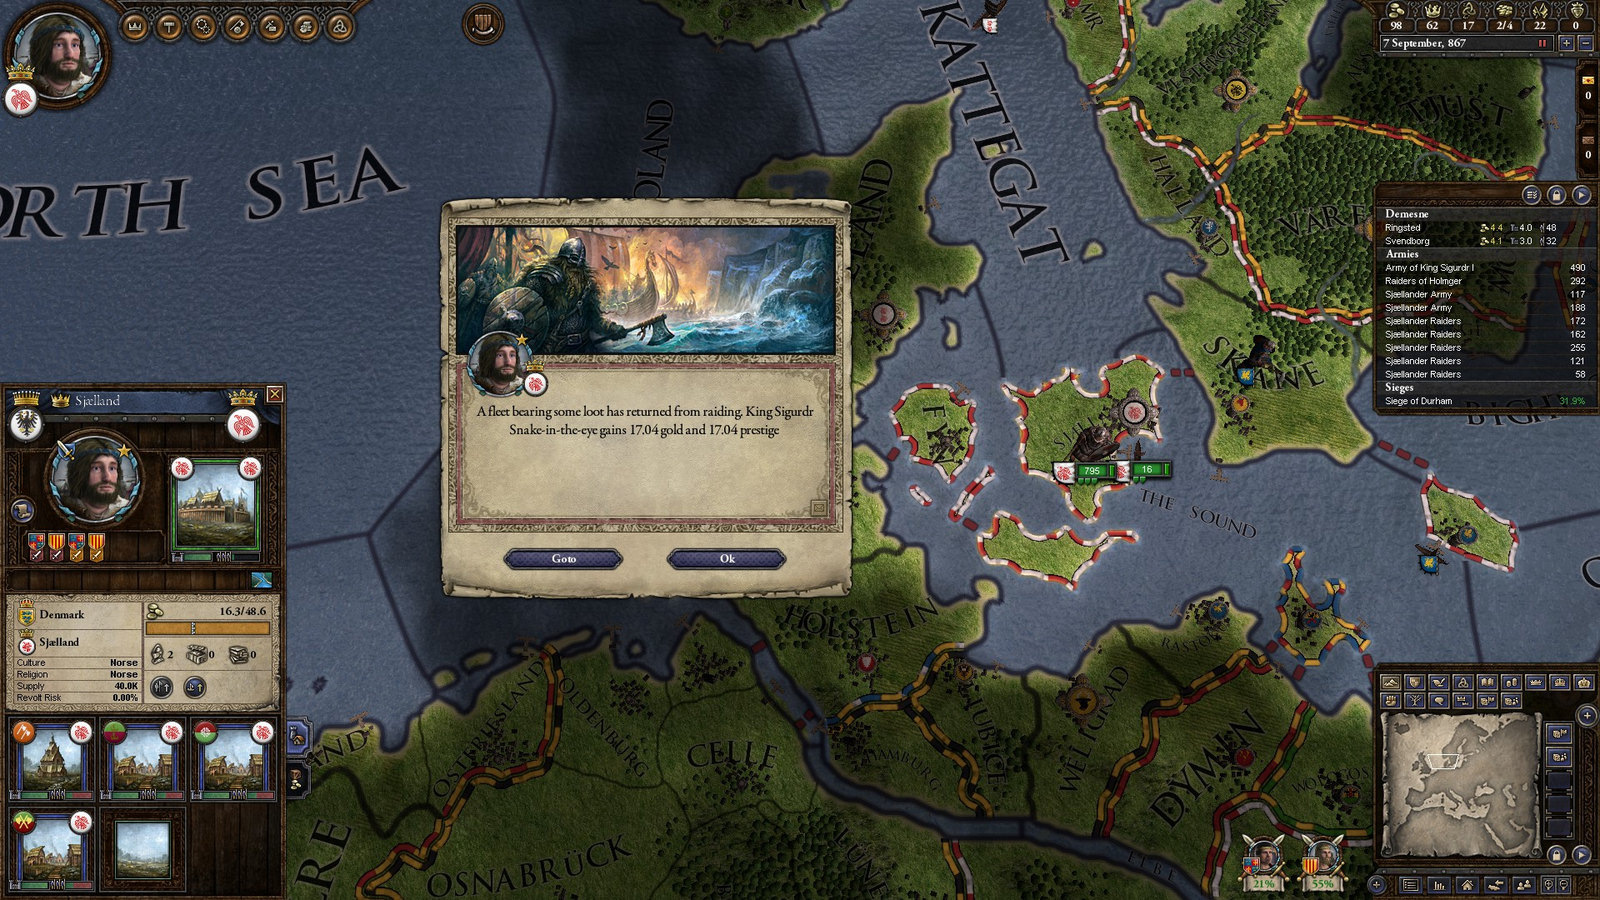 Crusader Kings 3 is free to play on Steam for the next four days